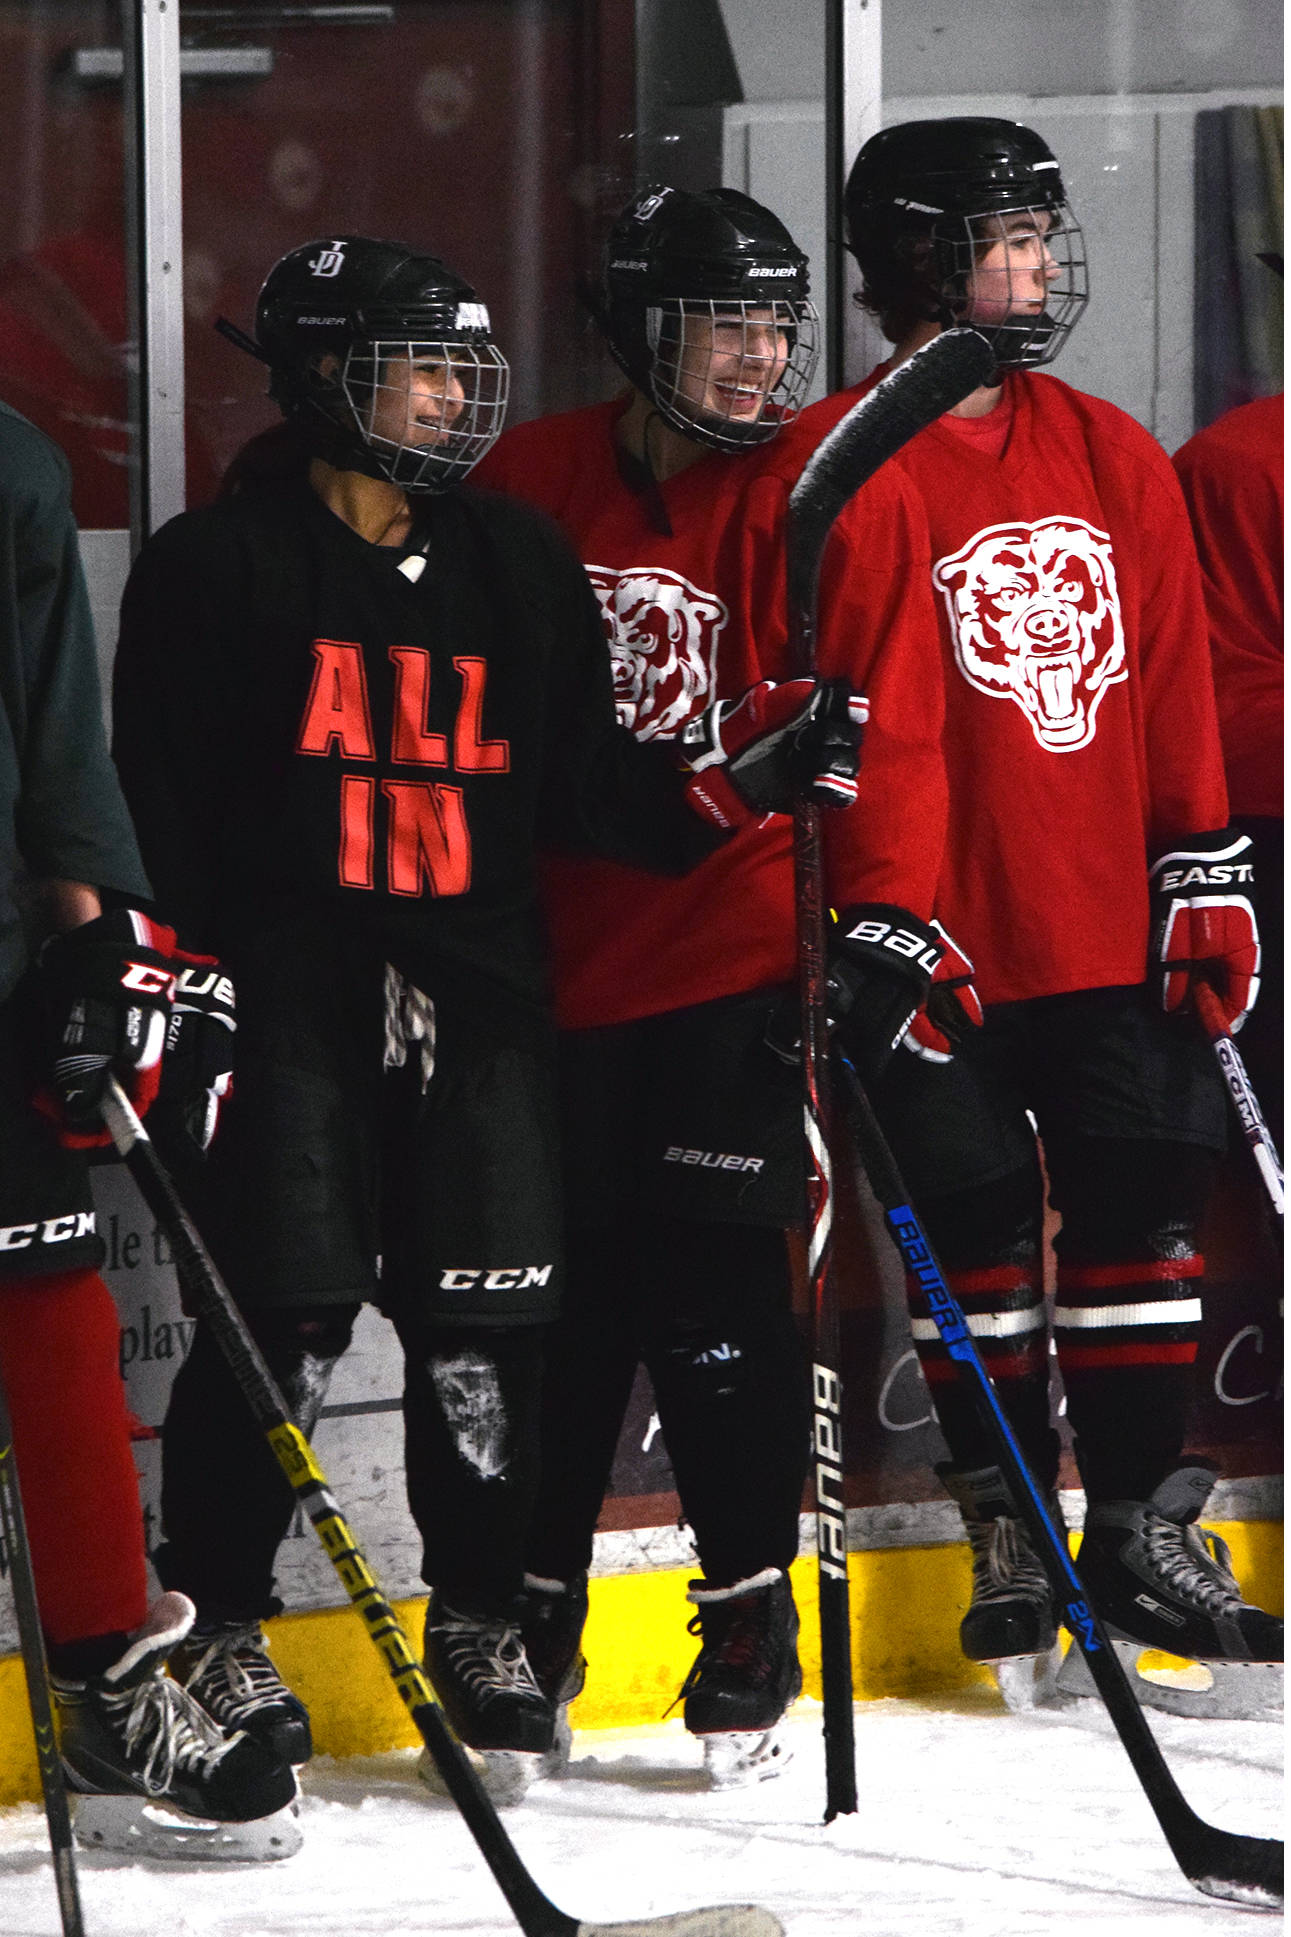 Juneau-Douglas: Yadaat.at Kale sophomores Nikki Lahnum, left, and Kyla Bentz share in a lighter moment during hockey practice at Treadwell Arena on Thursday, Oct. 31, 2019. (Nolin Ainsworth | Juneau Empire)